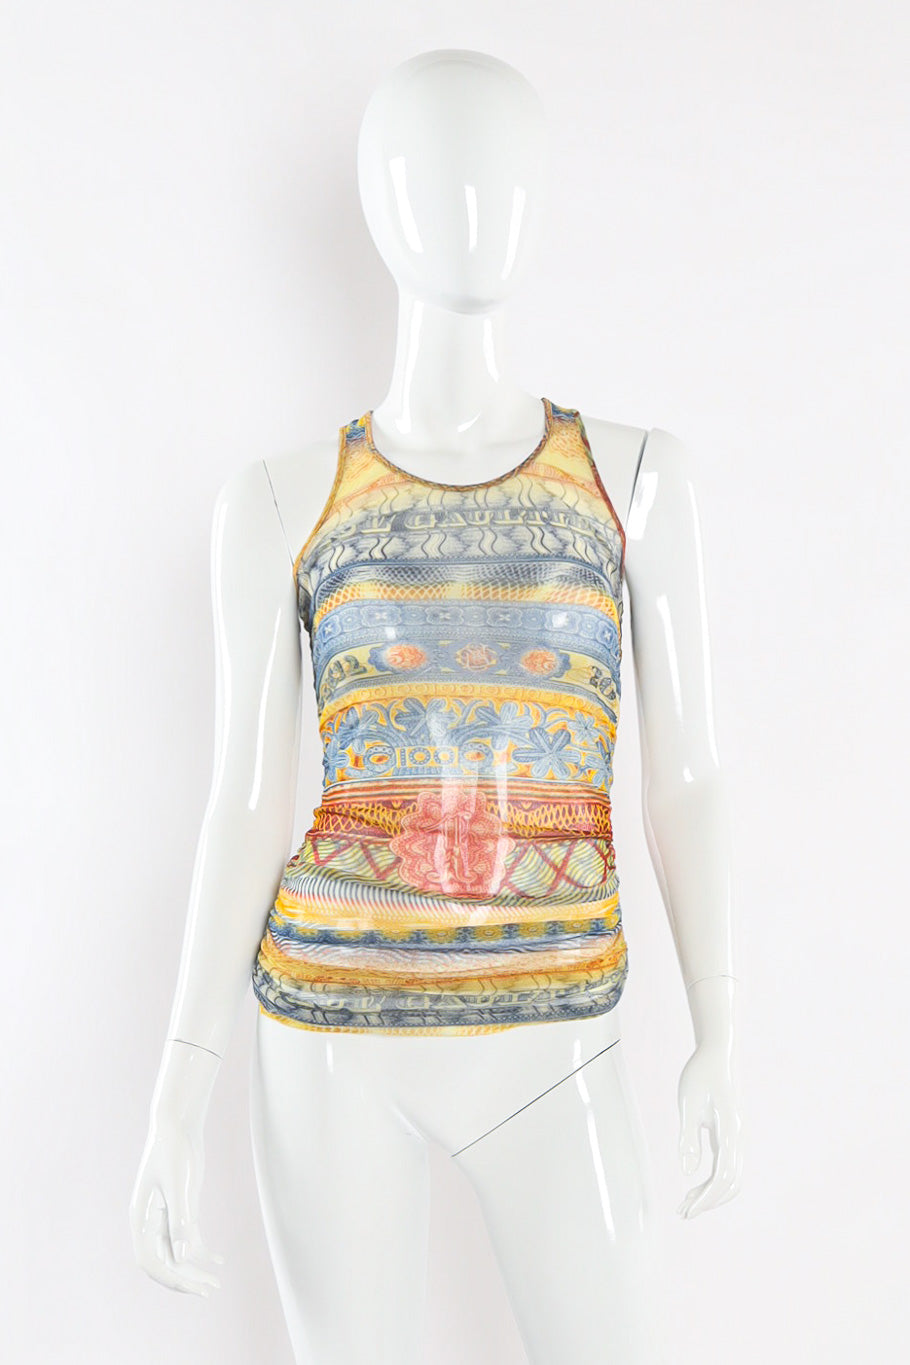 Currency Printed Tank Top by Jean Paul Gaultier Front View @recessla